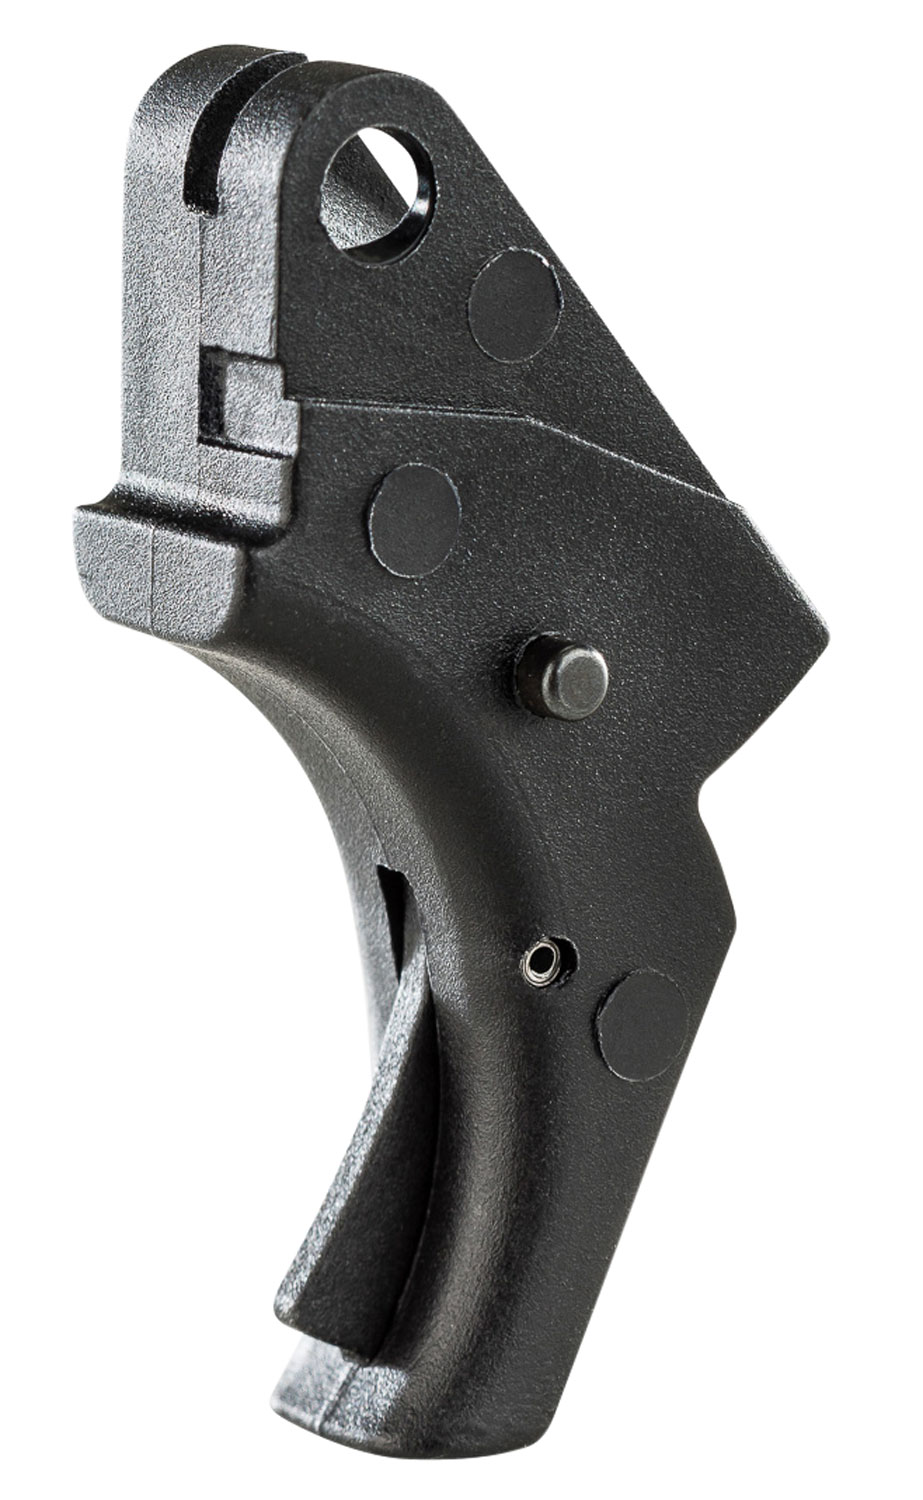 Apex Tactical 100026 Polymer Action Enhancement Trigger Drop-in Trigger with 5-5.50 lbs Draw Weight, for S&W M&P